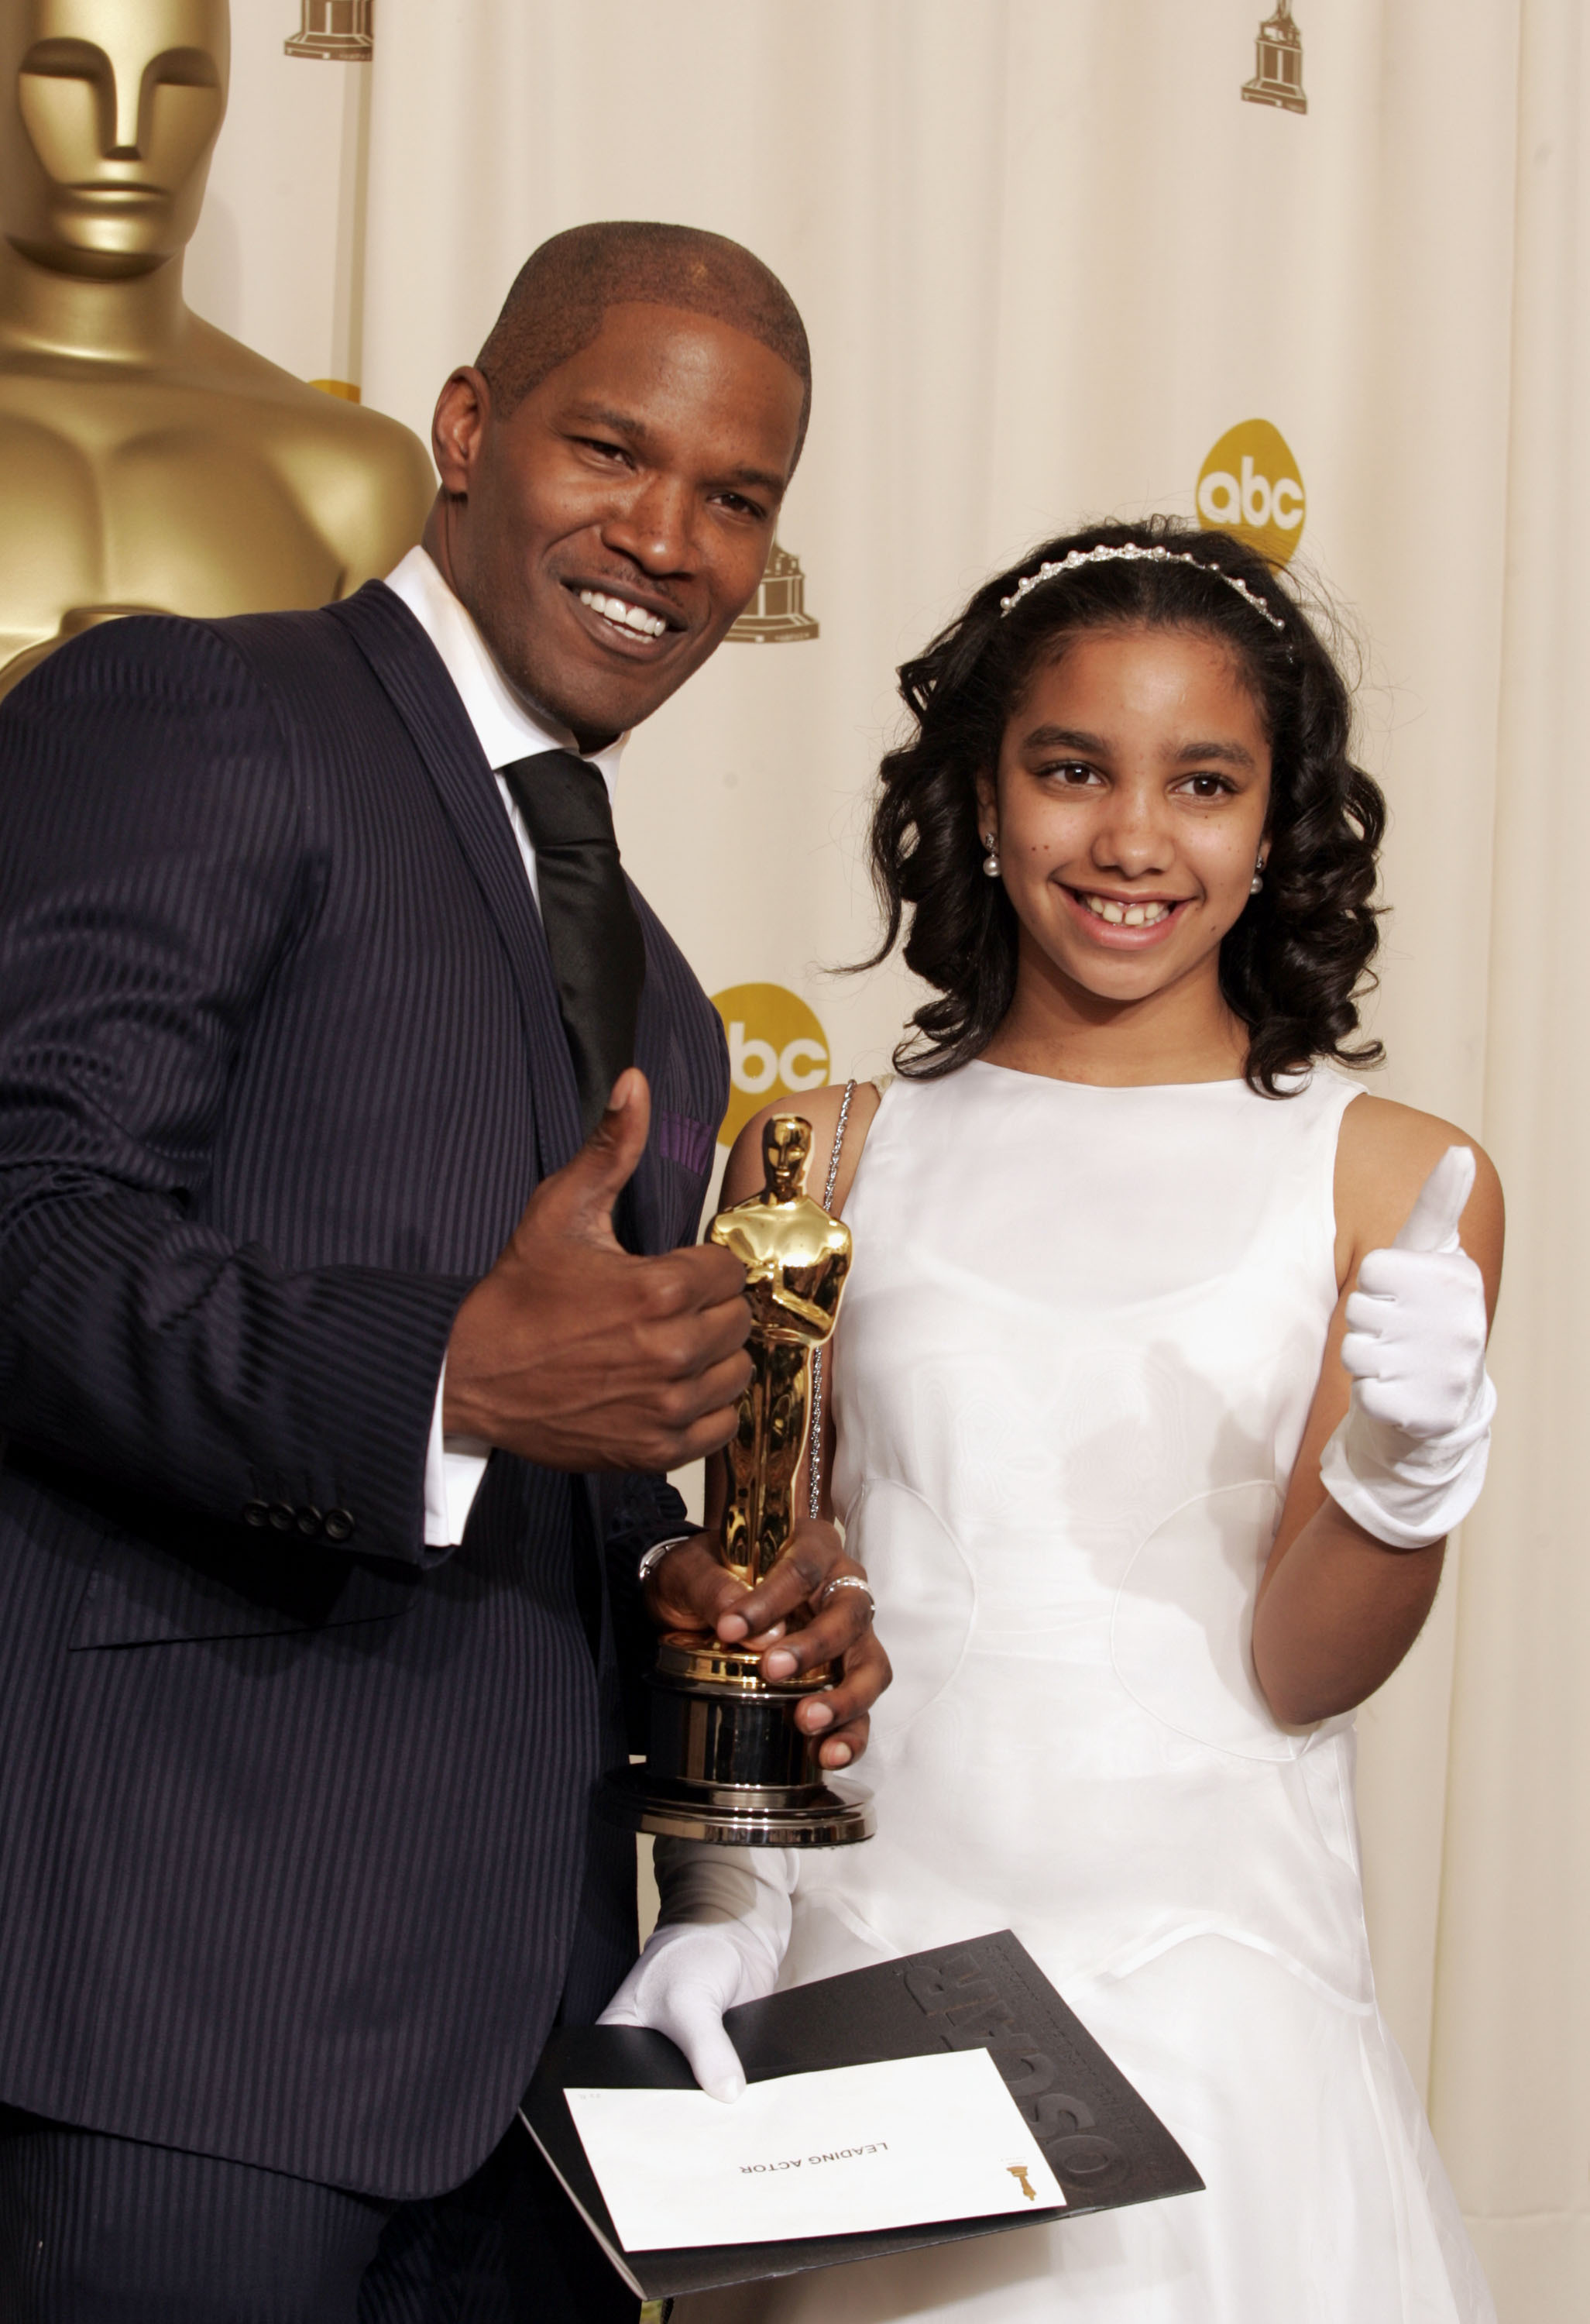 <p><a href="https://www.wonderwall.com/celebrity/profiles/overview/jamie-foxx-722.article">Jamie Foxx</a> posed with his best actor Oscar for "Ray" and his then-11-year-old daughter, Corinne Foxx -- whose mom is the actor's ex-girlfriend Connie Kline -- at the 77th Annual Academy Awards on Feb. 27, 2005. Now see how much she's grown...</p>